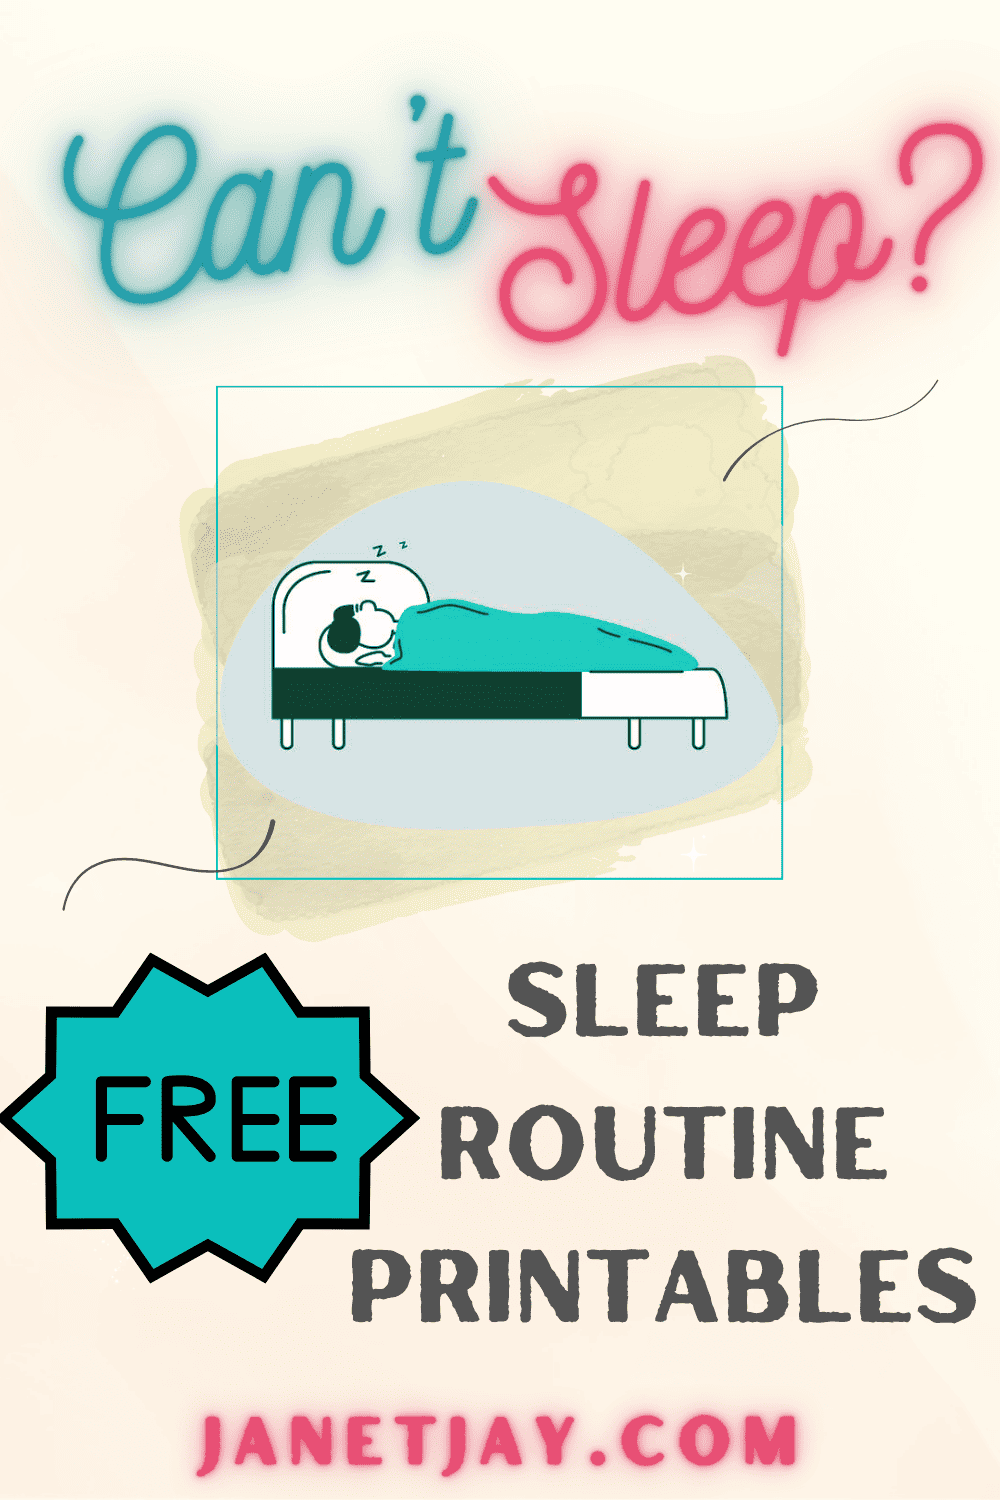 "can't sleep? free sleep routine printables, janetjay.com" with image of person in bed, free bedtime routine printables, free medical binder printables, free sleep hygiene printables